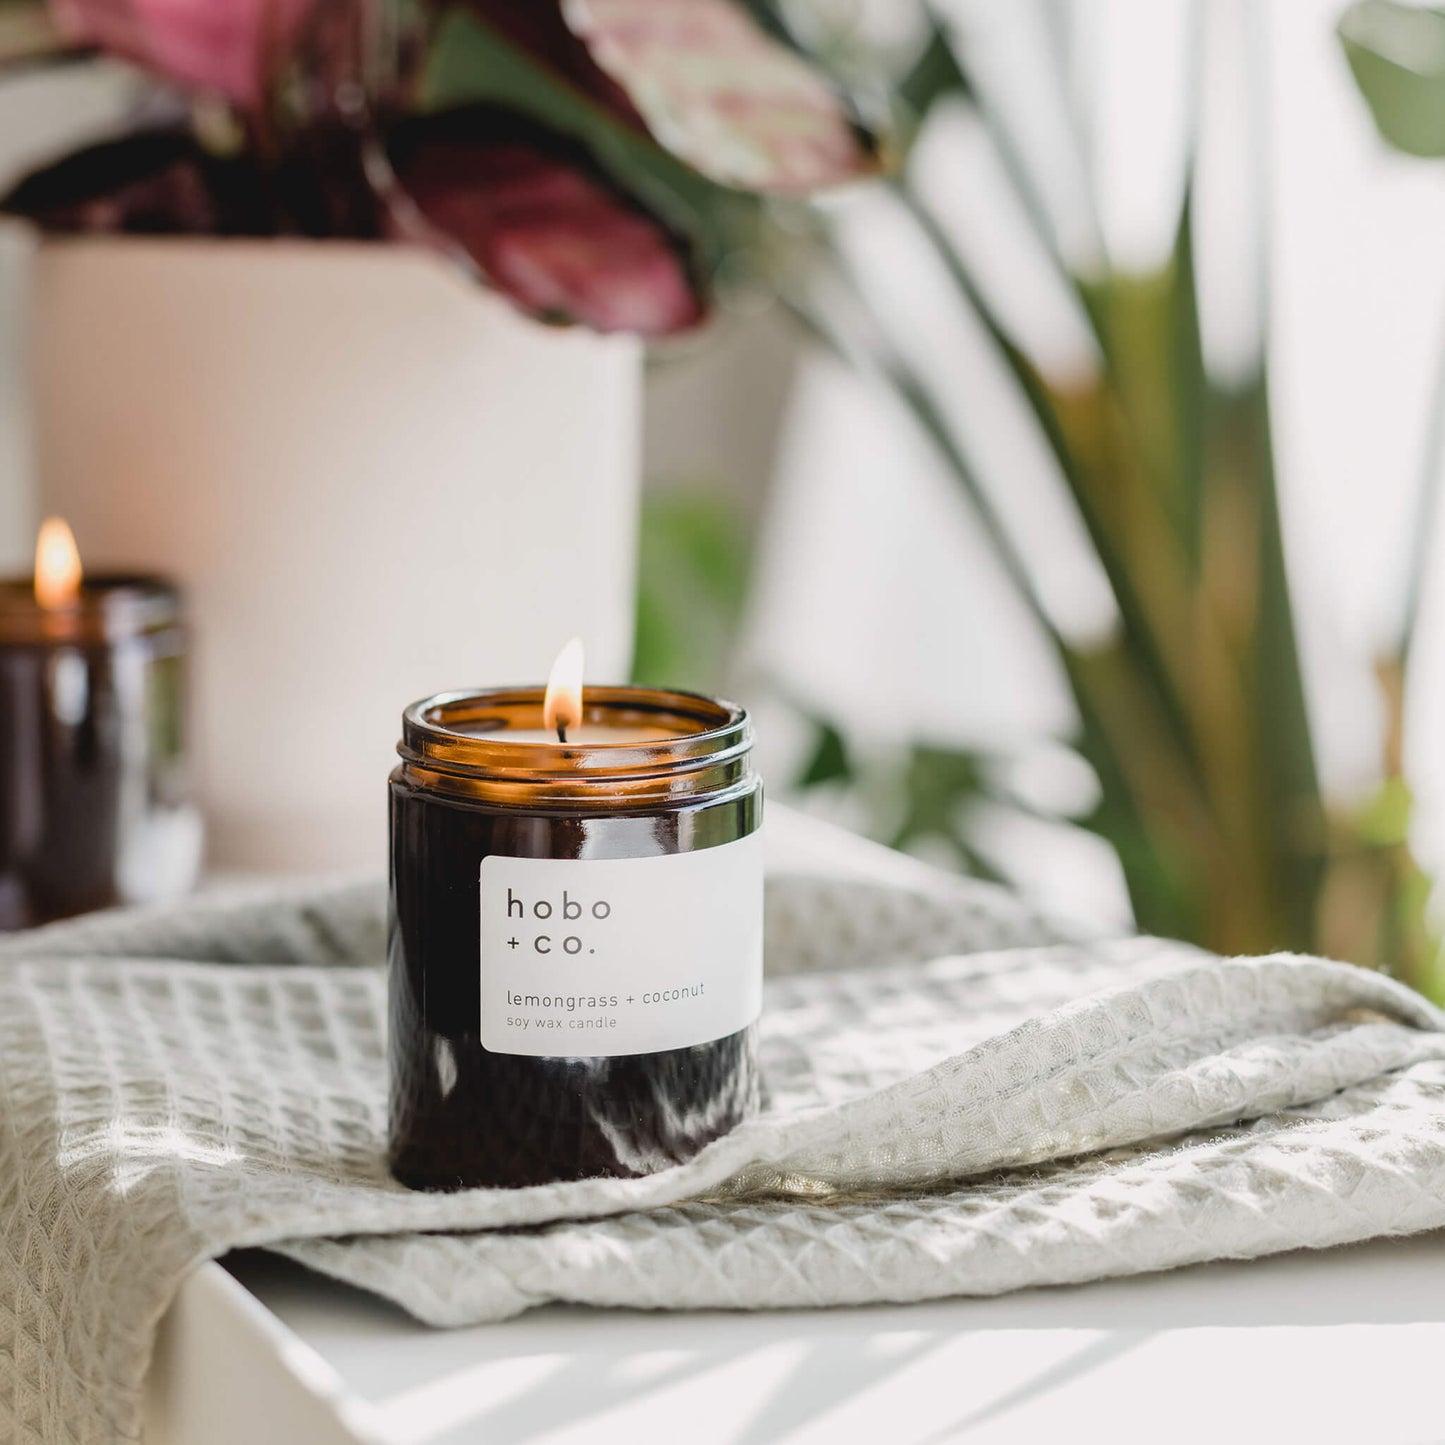 Lemongrass & Coconut Scented Candle by Hobo & Co.